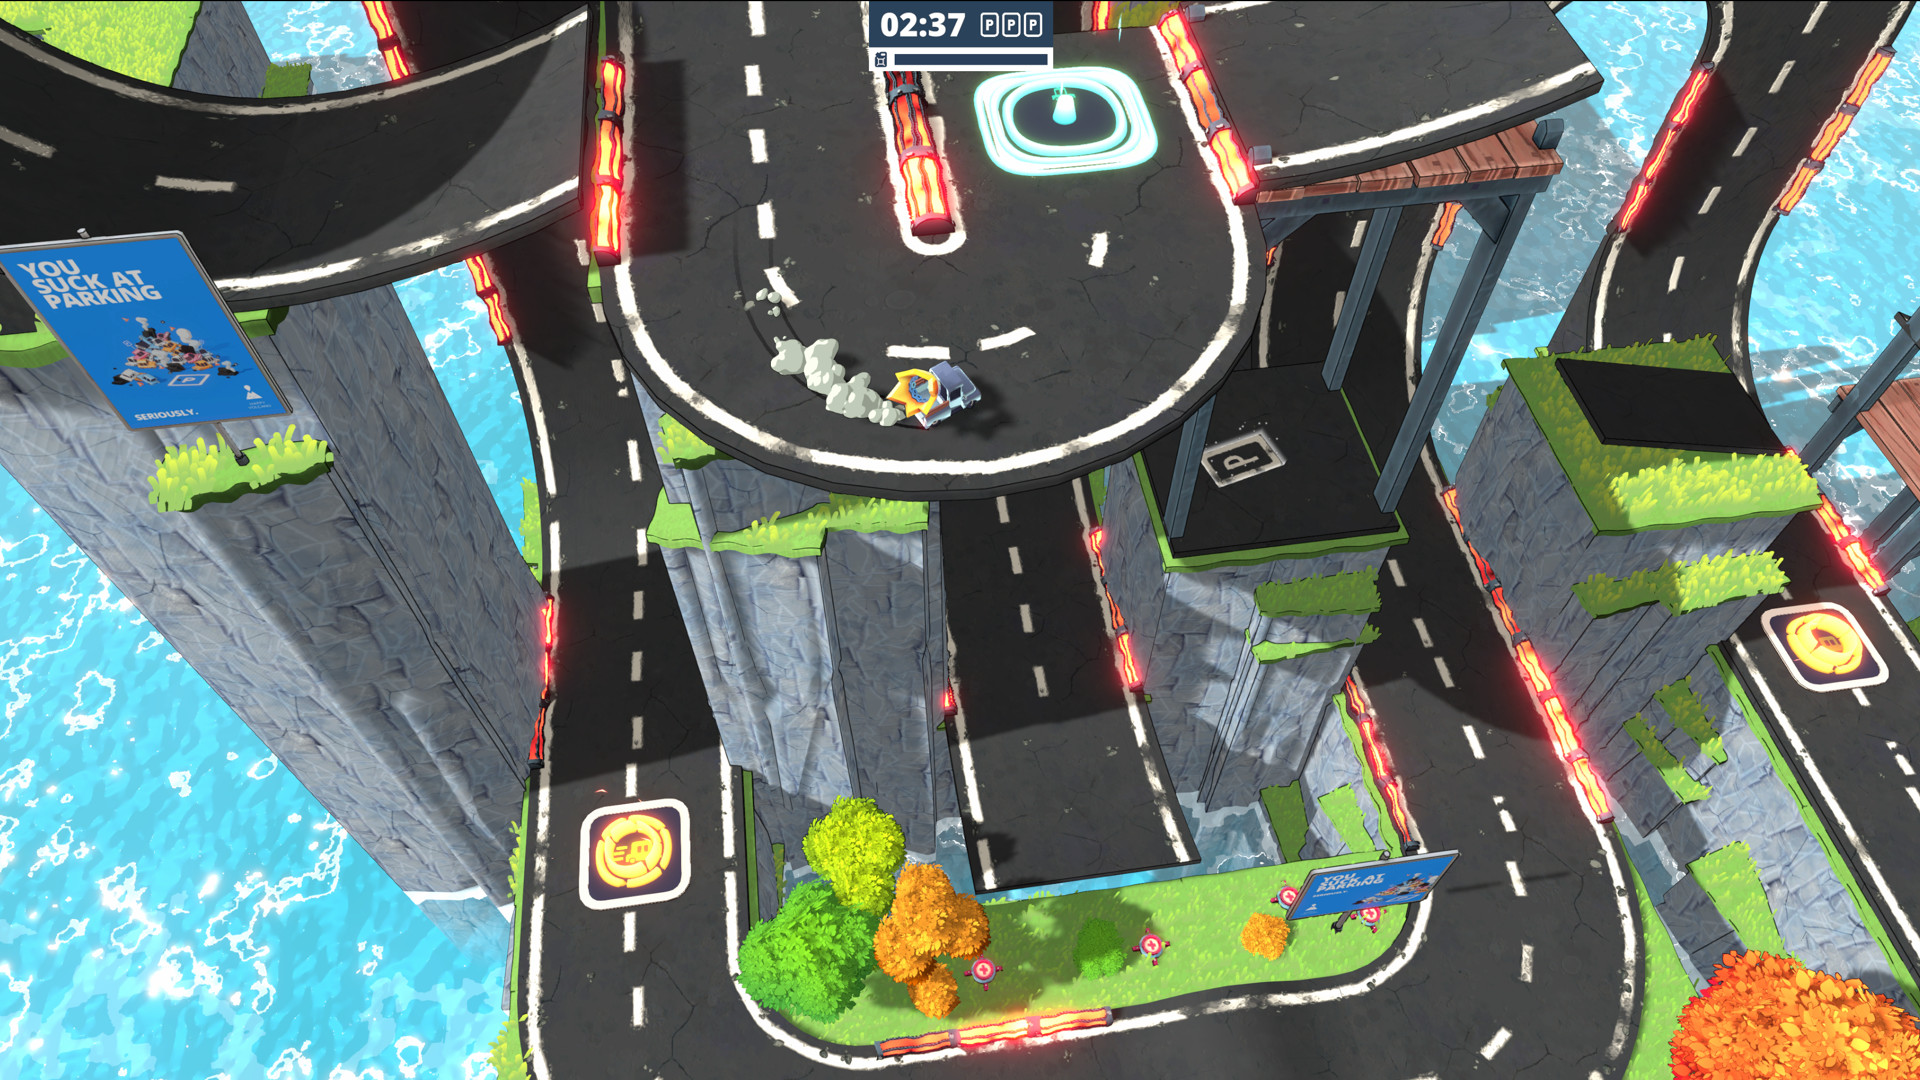 You Suck at Parking screenshot showing a car racing on an elevated platform